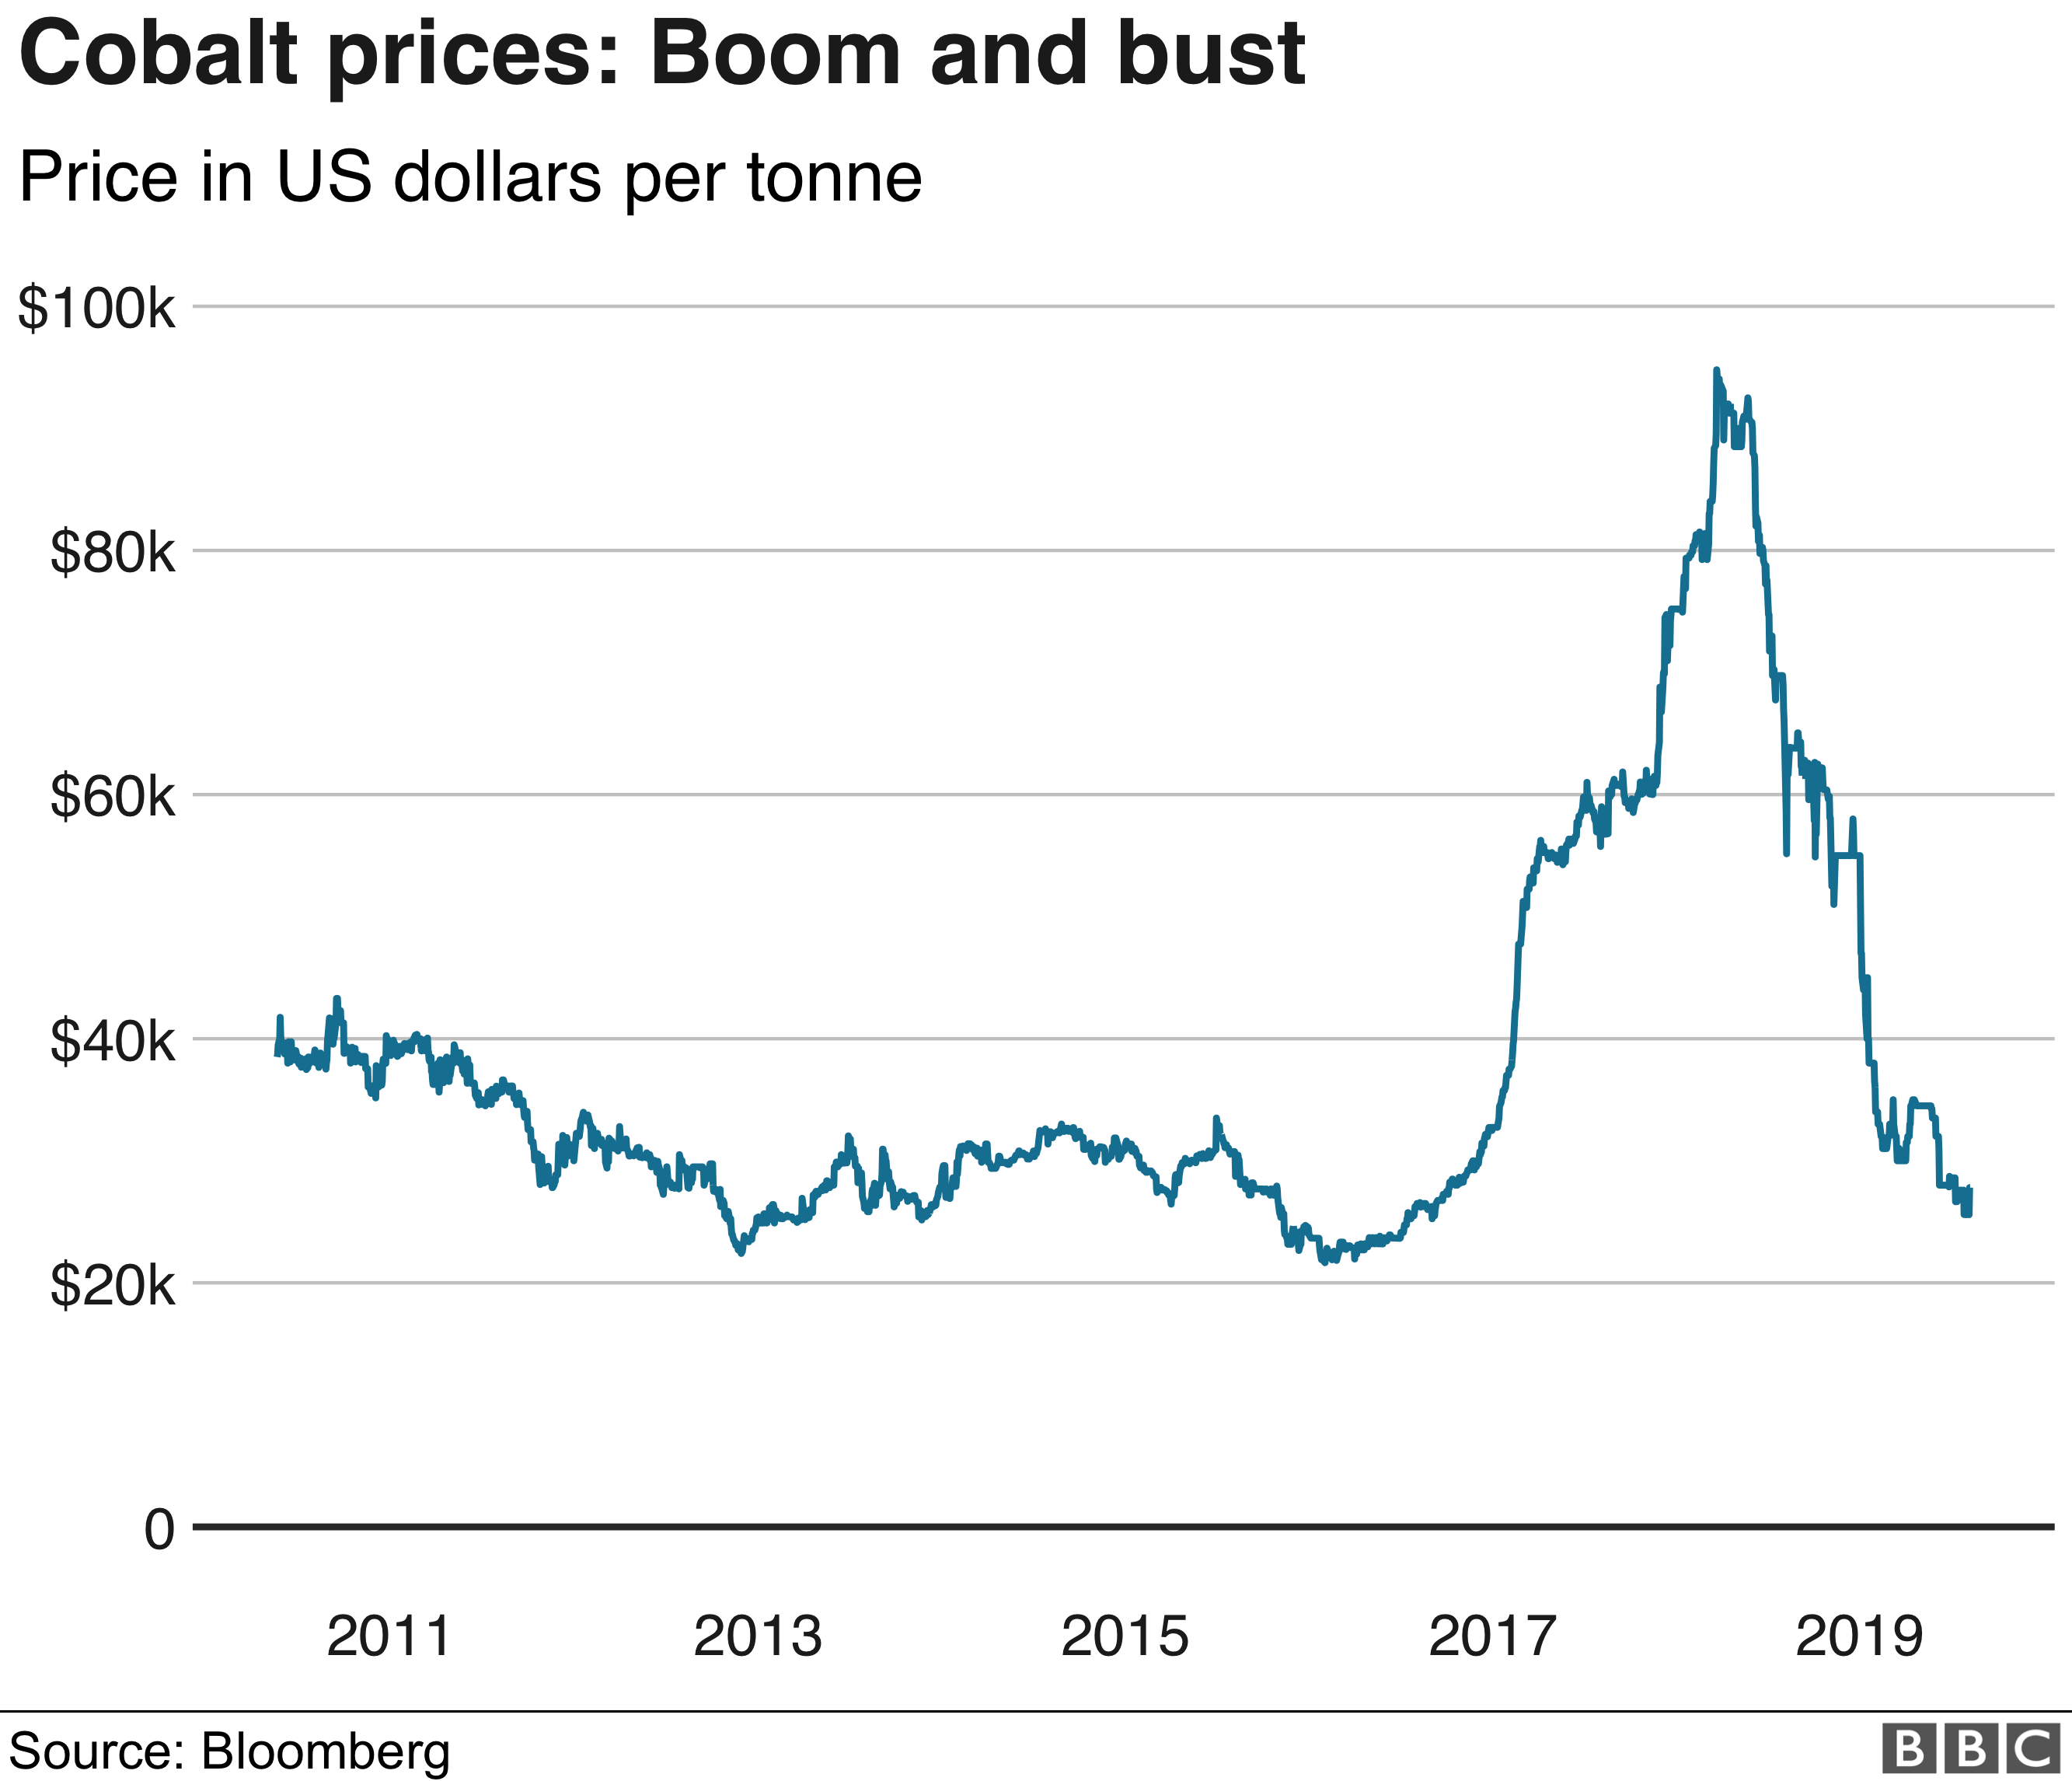 Graph of cobalt price boom and bust